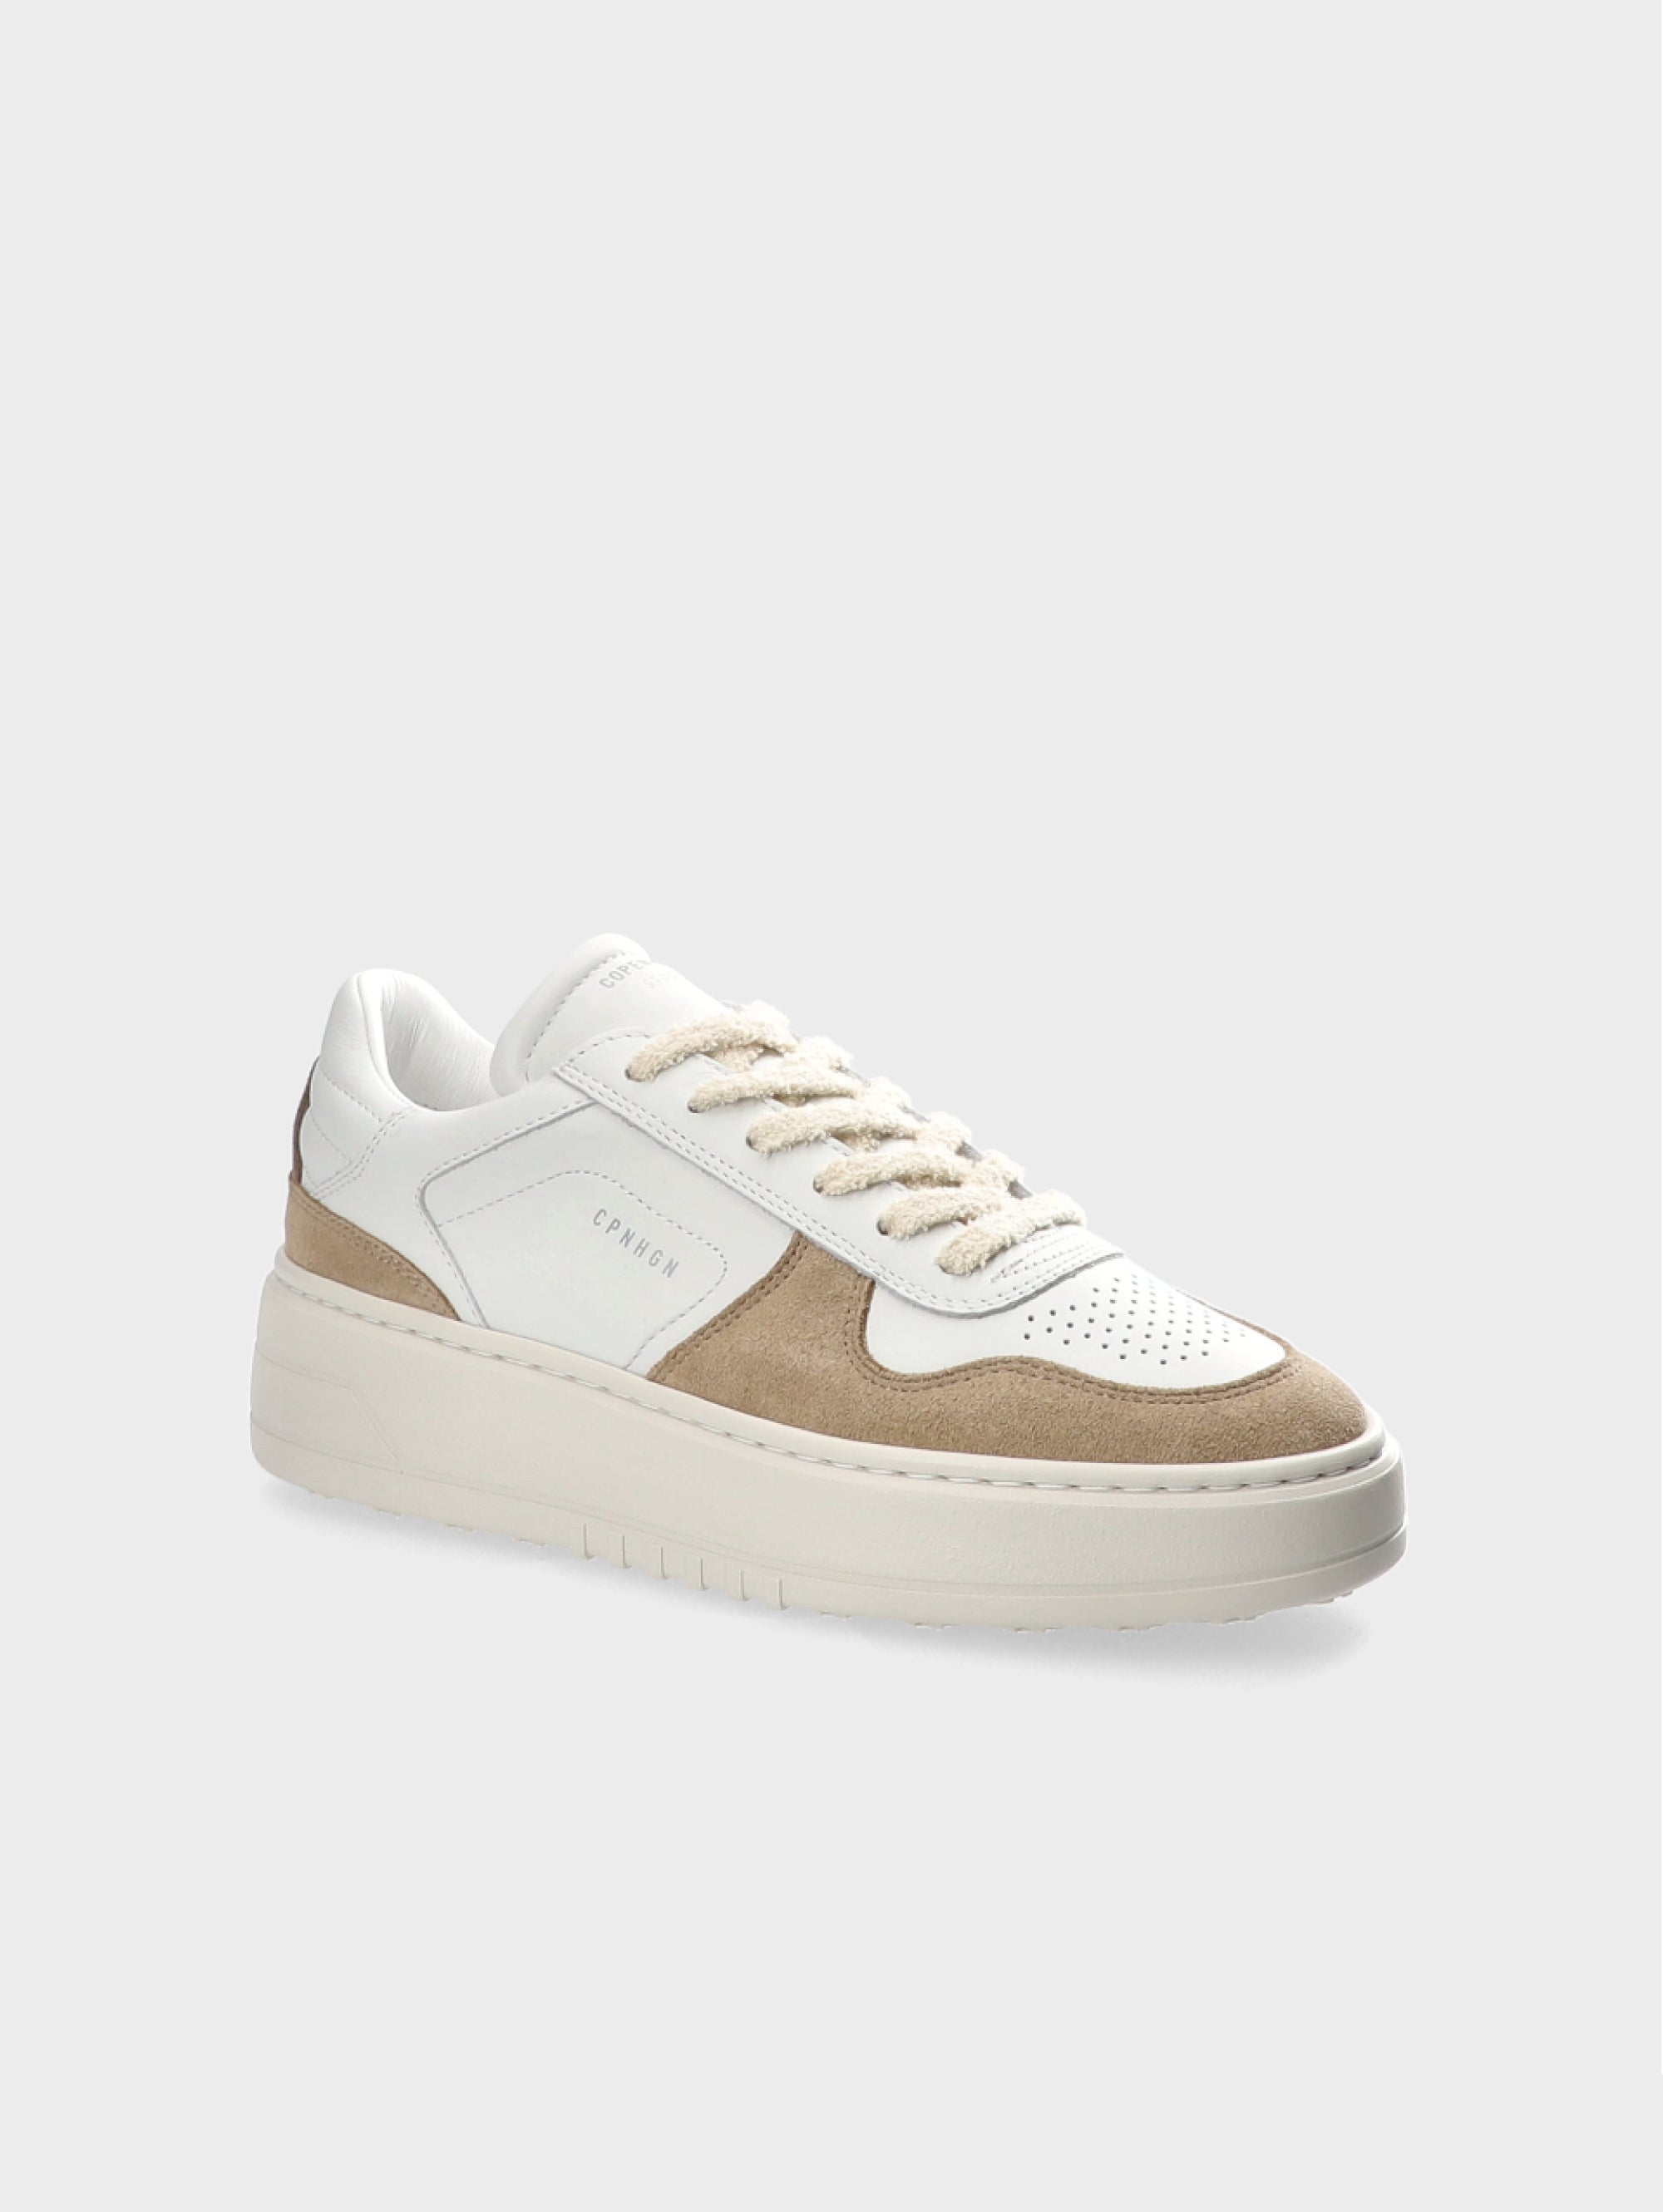 White/Beige Suede and Leather Platform Sneakers